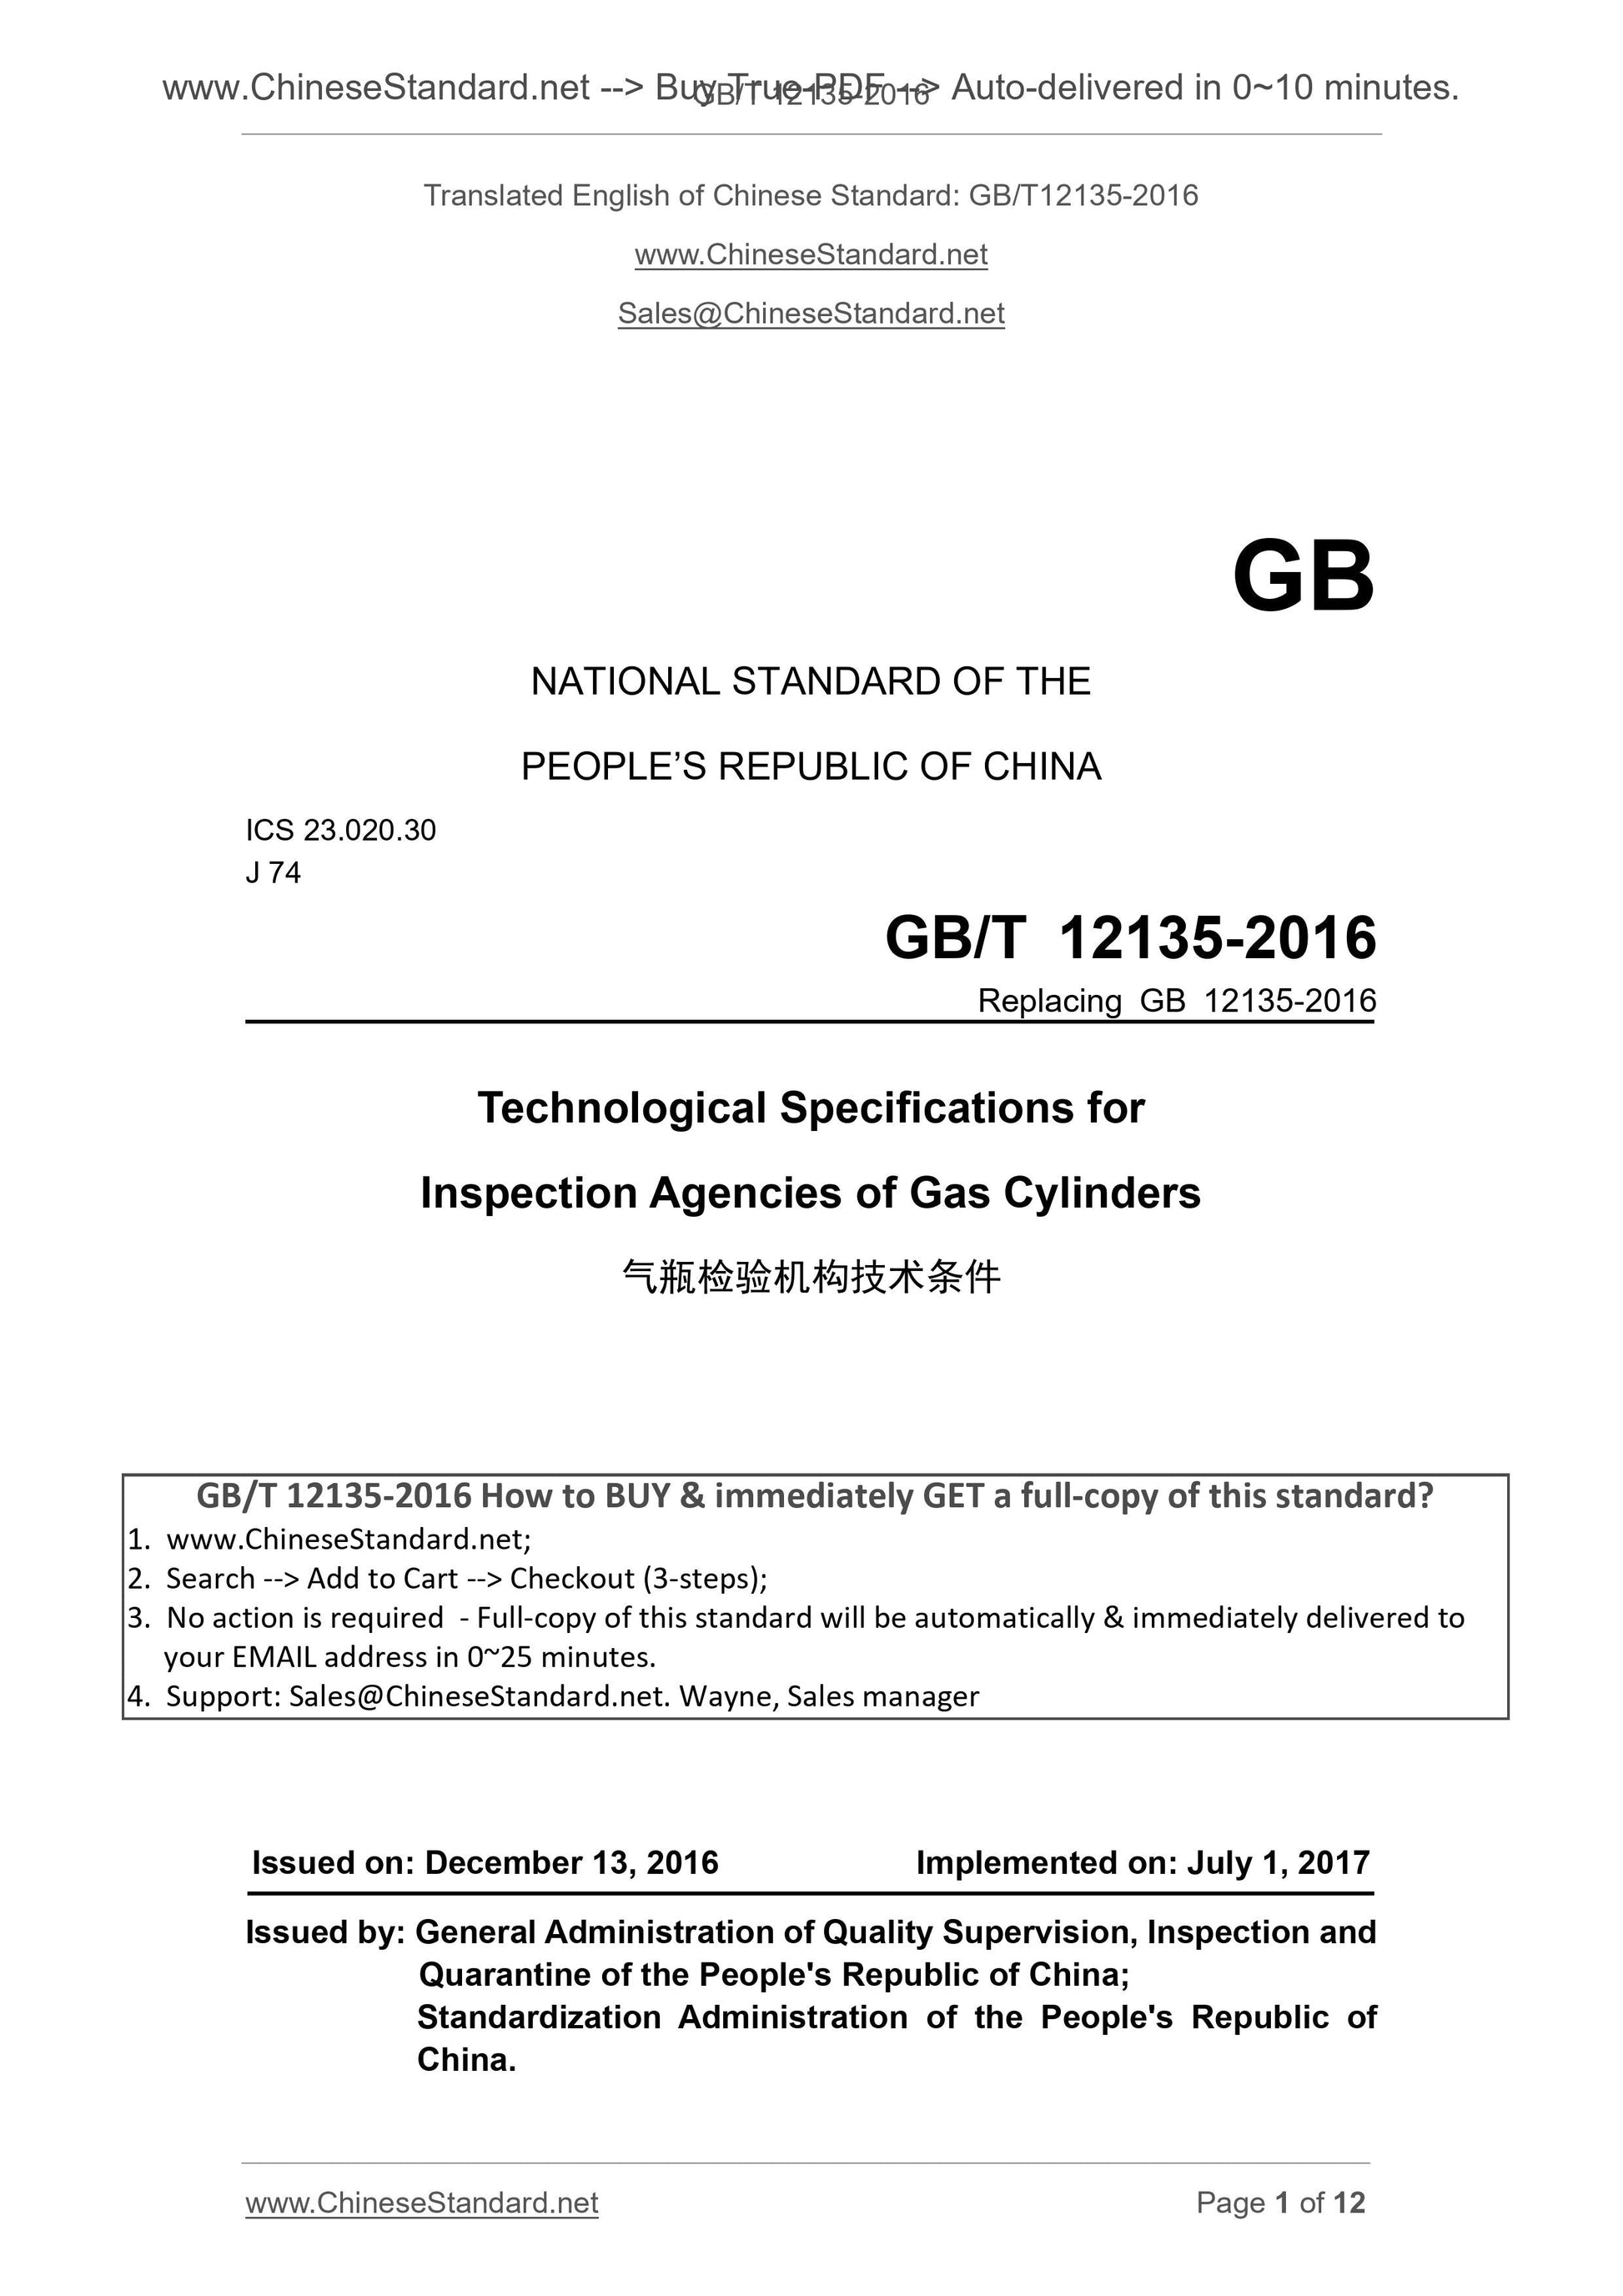 GB/T 12135-2016 Page 1